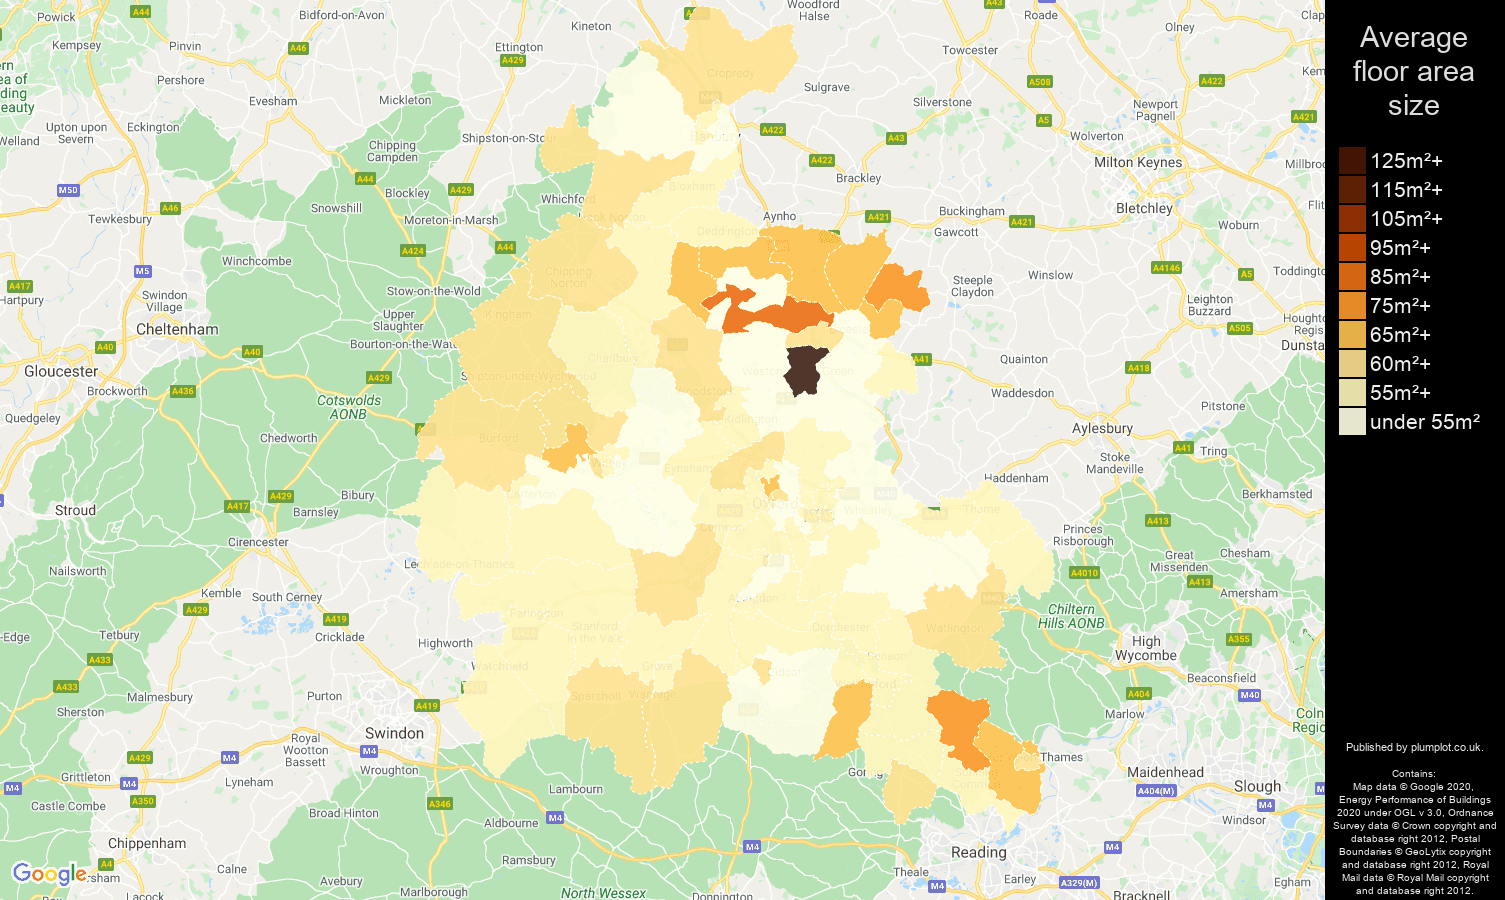 Oxfordshire map of average floor area size of flats